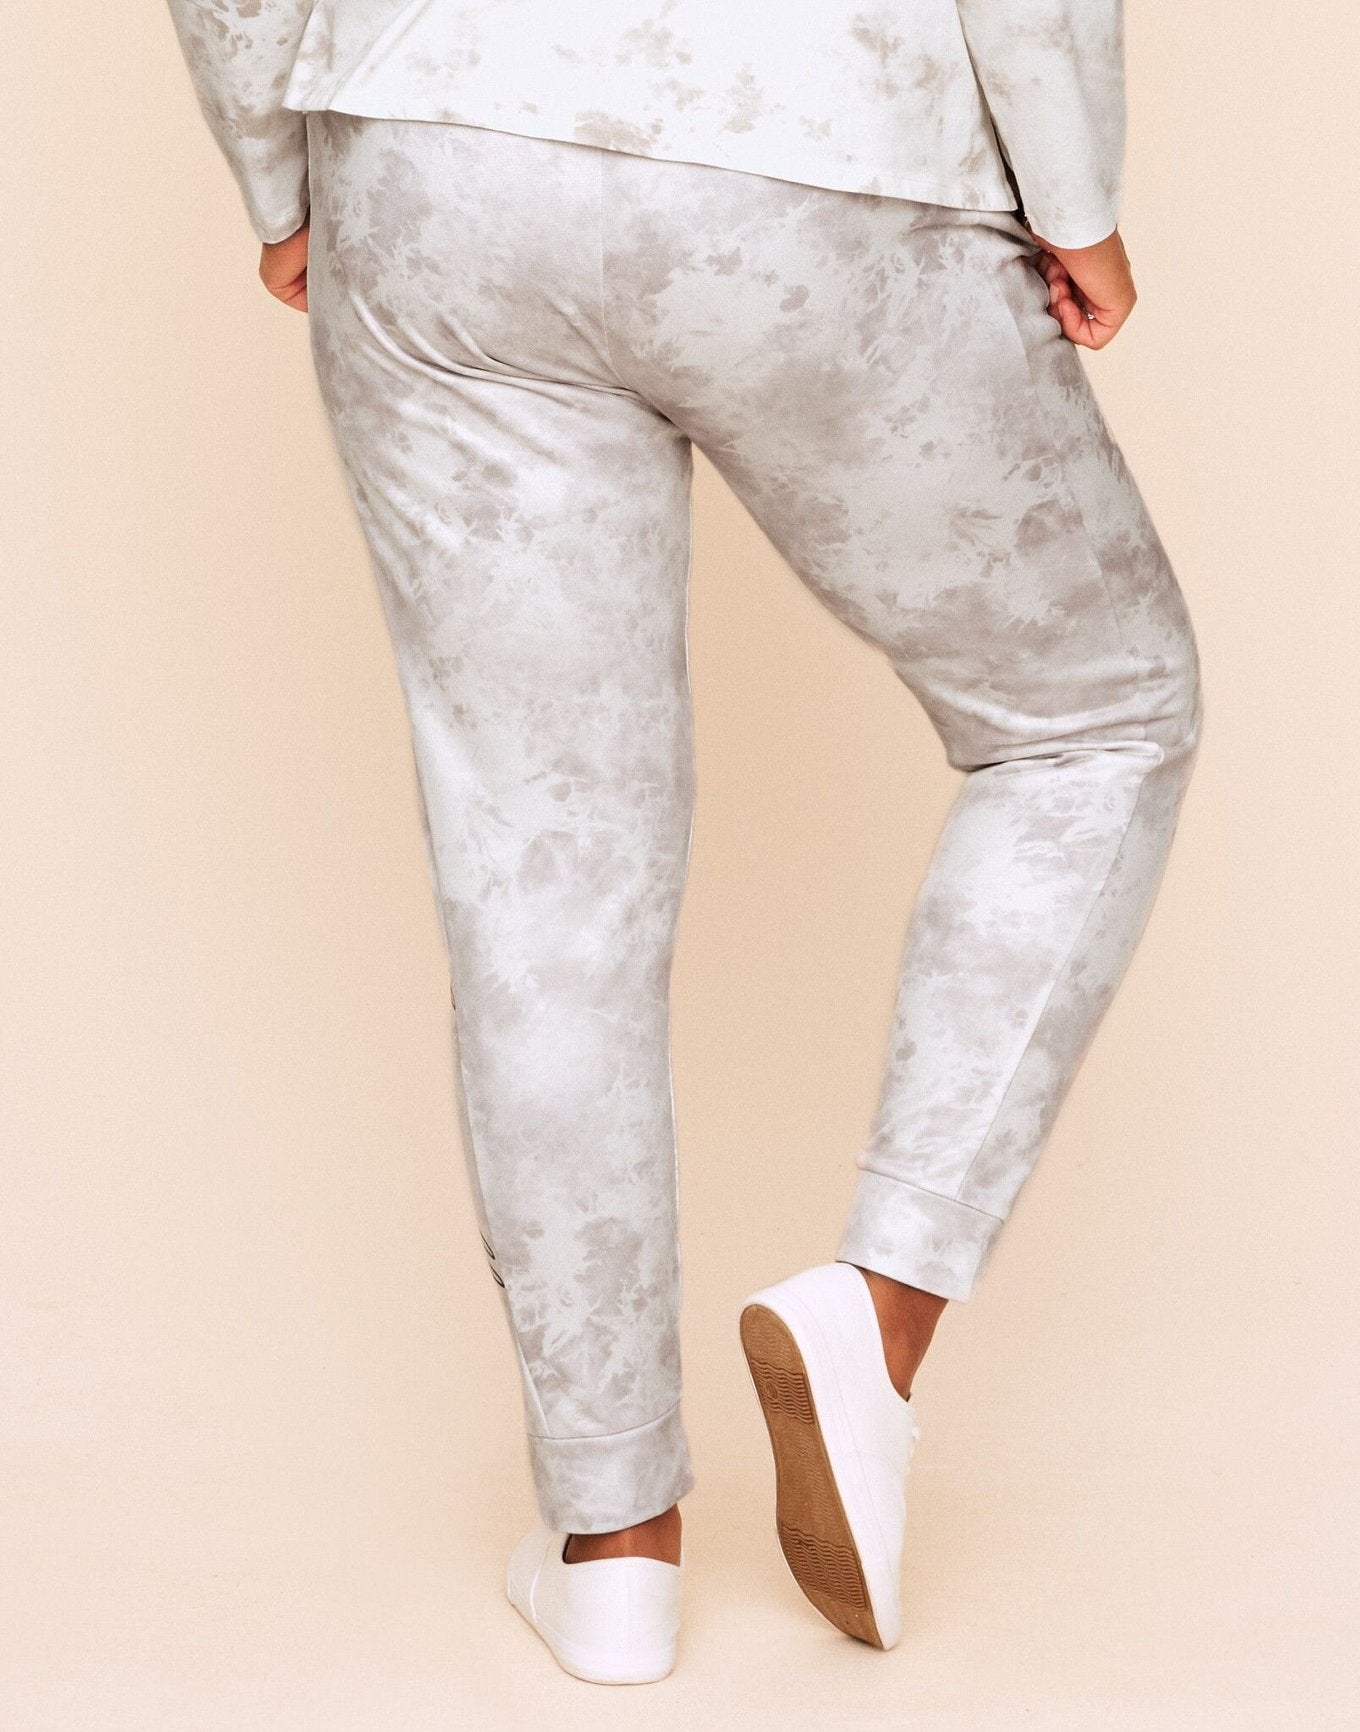 Earth Republic Shawn Jogger Pant Joggers in color Tea Stain Print and shape jogger